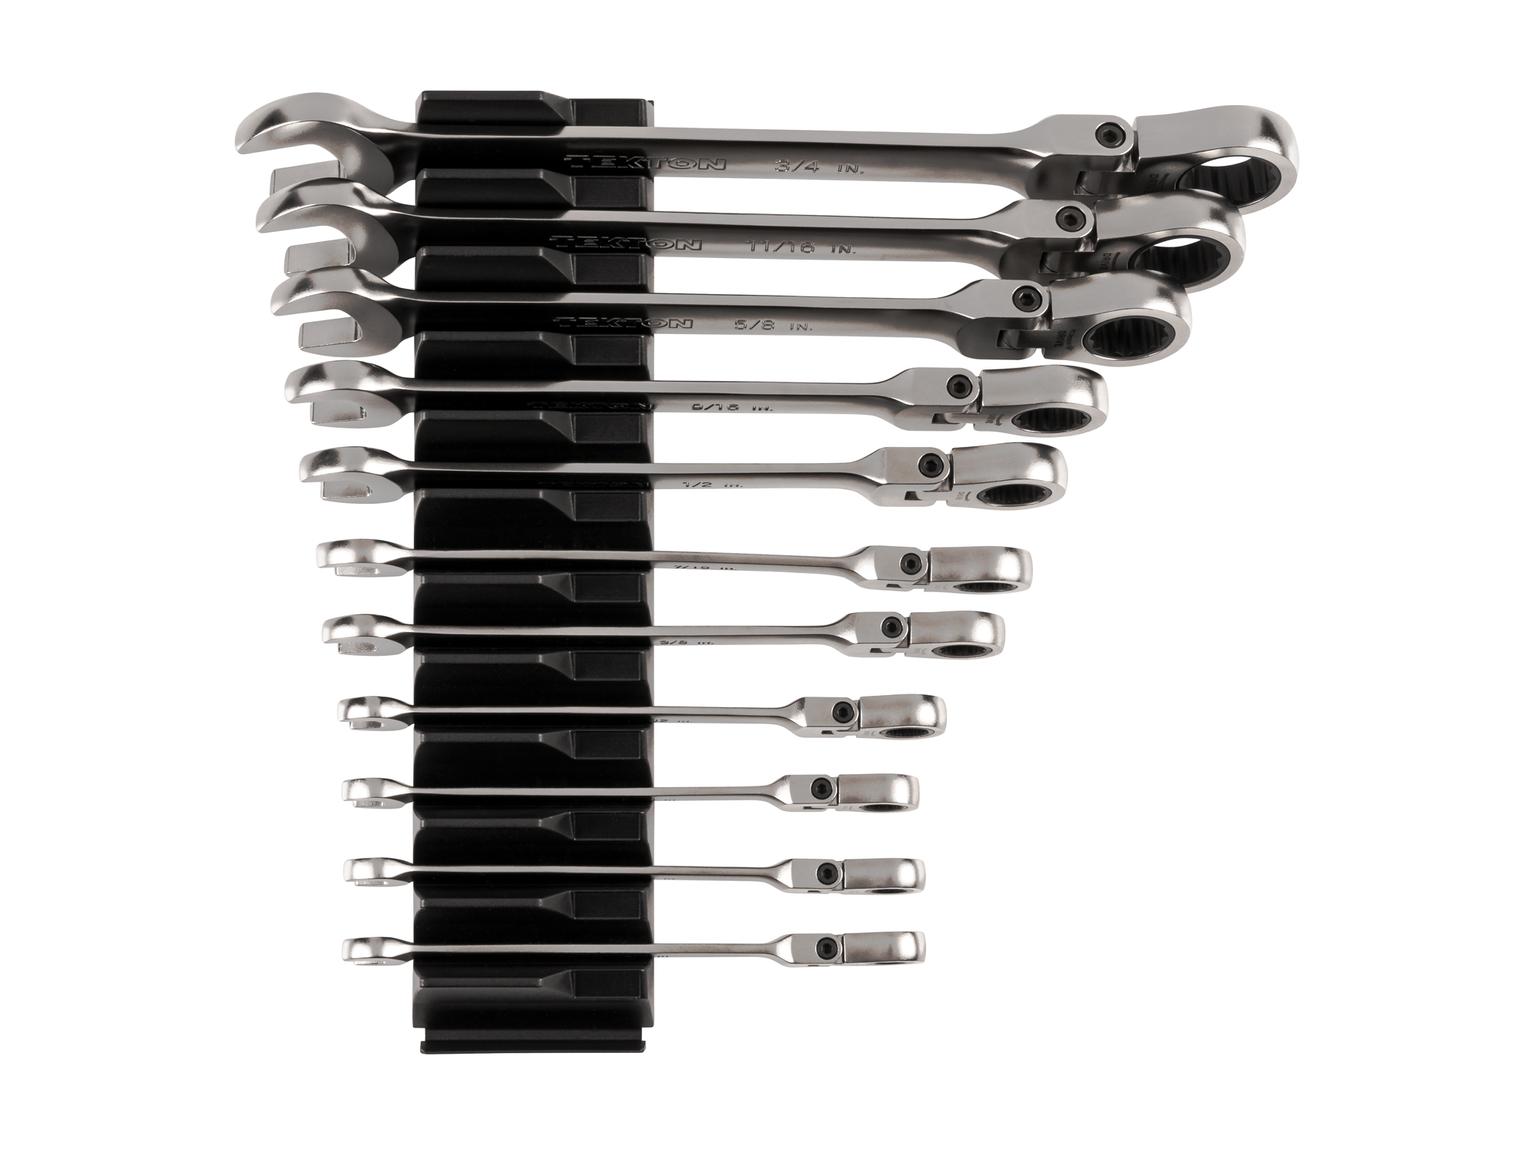 TEKTON WRC95300-T Flex Head 12-Point Ratcheting Combination Wrench Set with Modular Slotted Organizer, 11-Piece (1/4-3/4 in.)